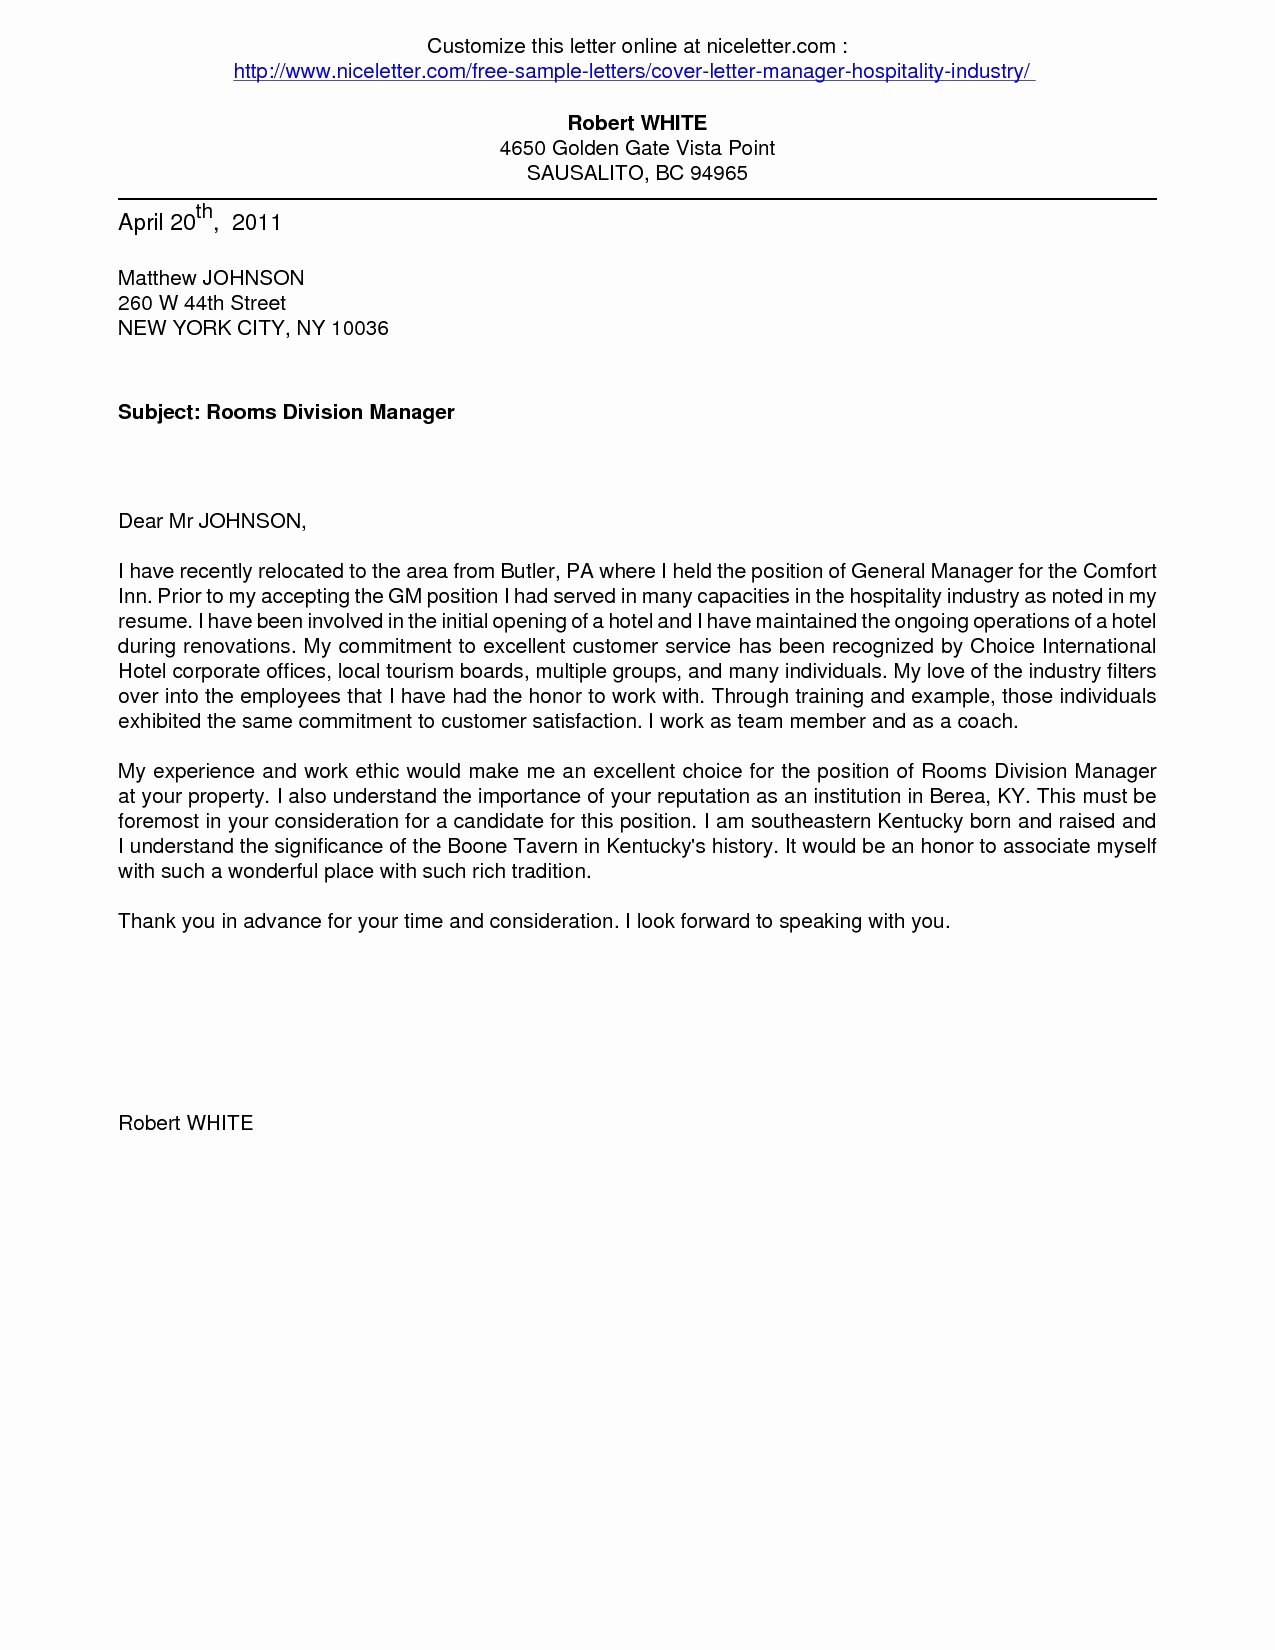 Example Cover Letter for Hotel and Restaurant